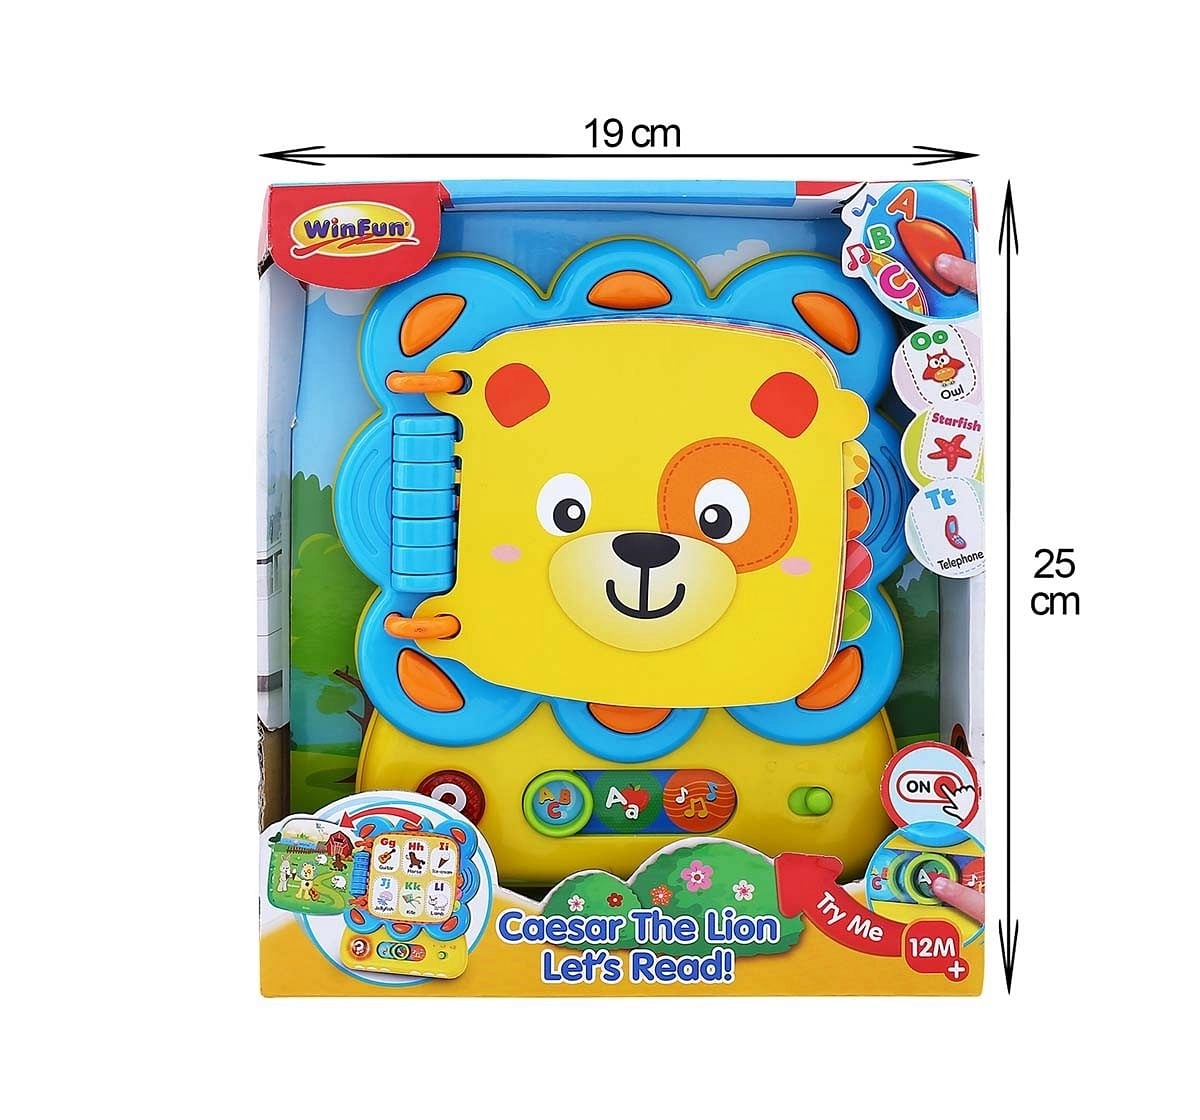 Winfun Caesar the Lion Let’S Read, Multi Color Learning Toys for Kids age 12M+ 